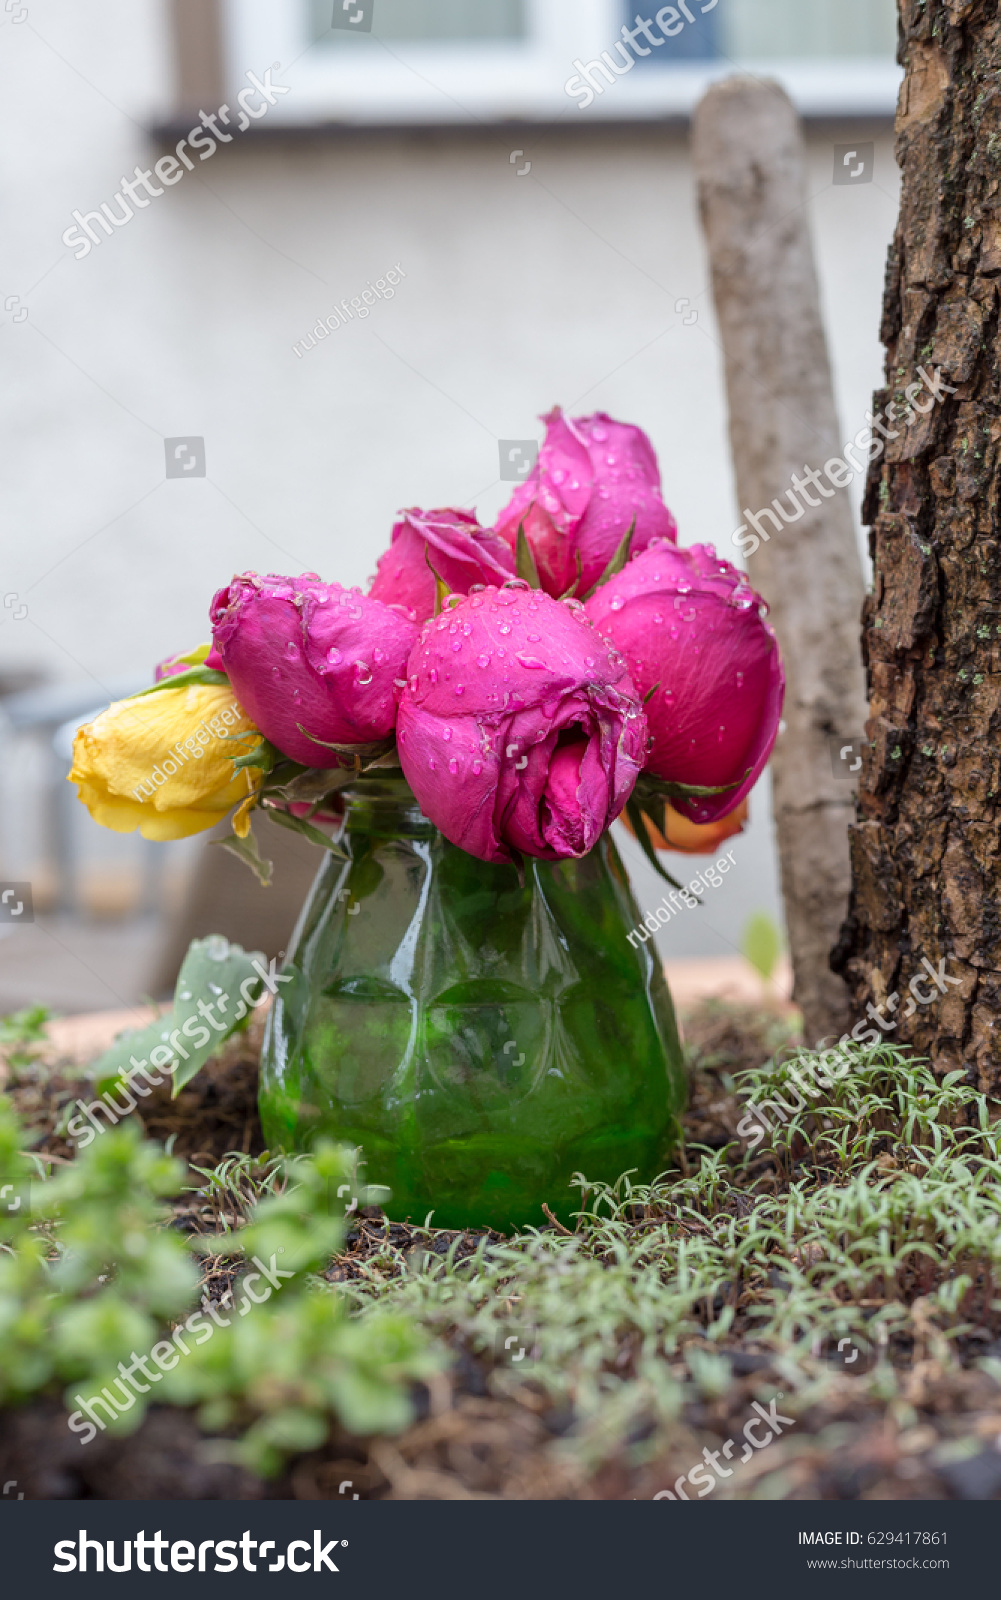 on a rainy day in may in south german historical city view on colorful flowers also in vase #629417861